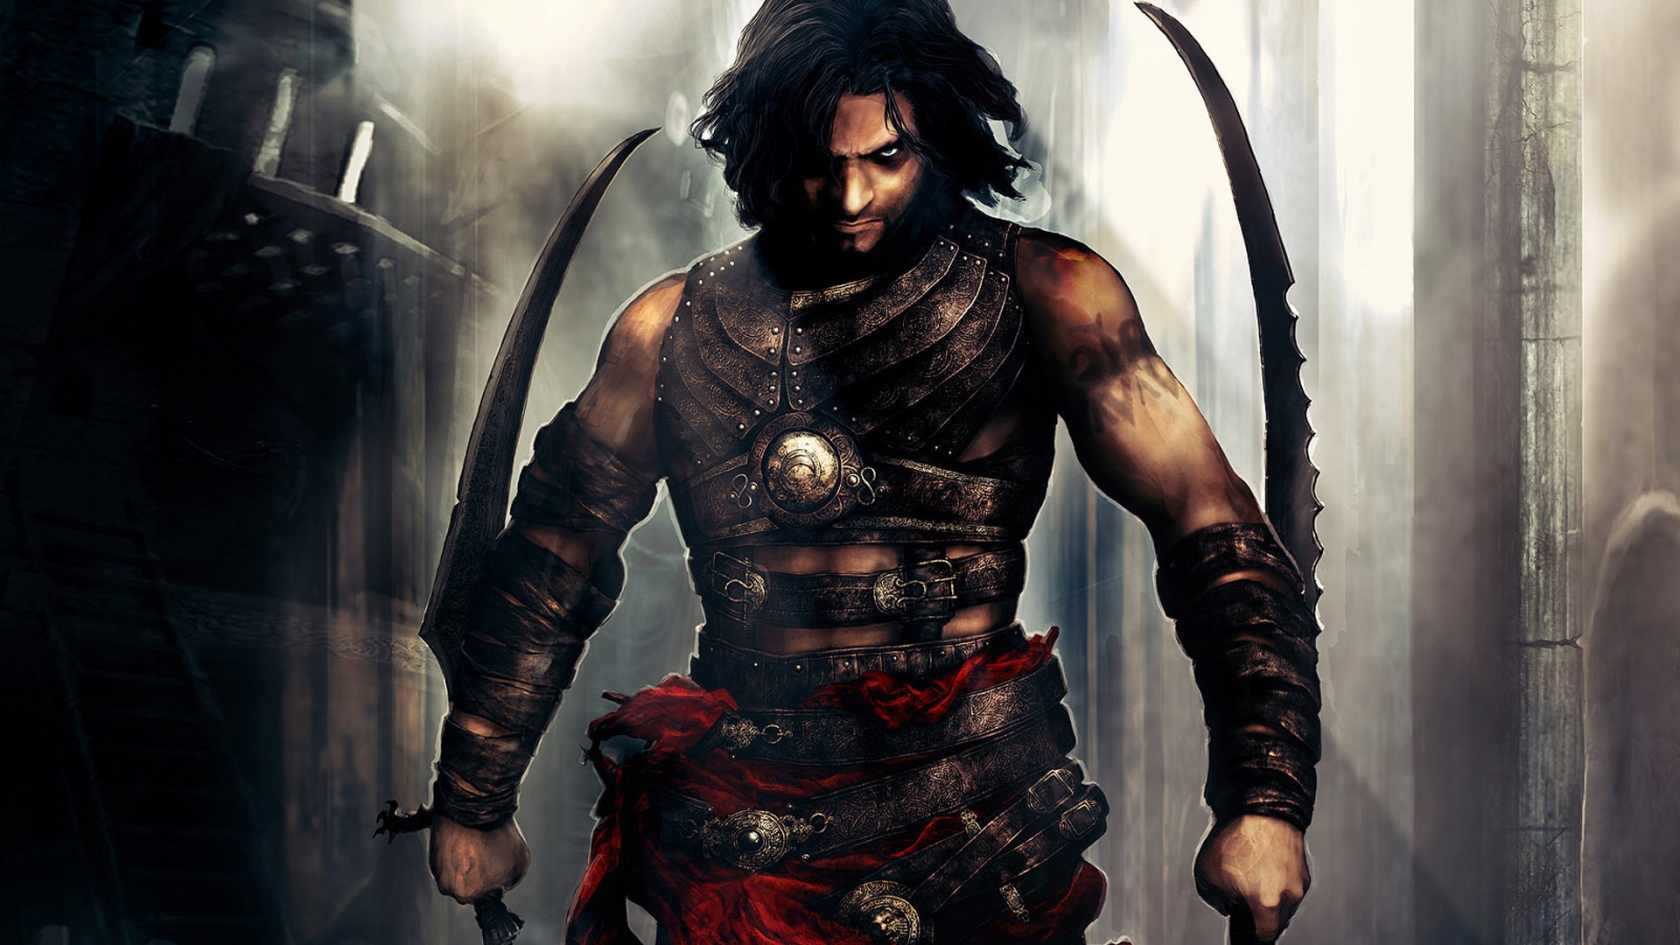 Prince of Persia Scene for 1680 x 945 HDTV resolution